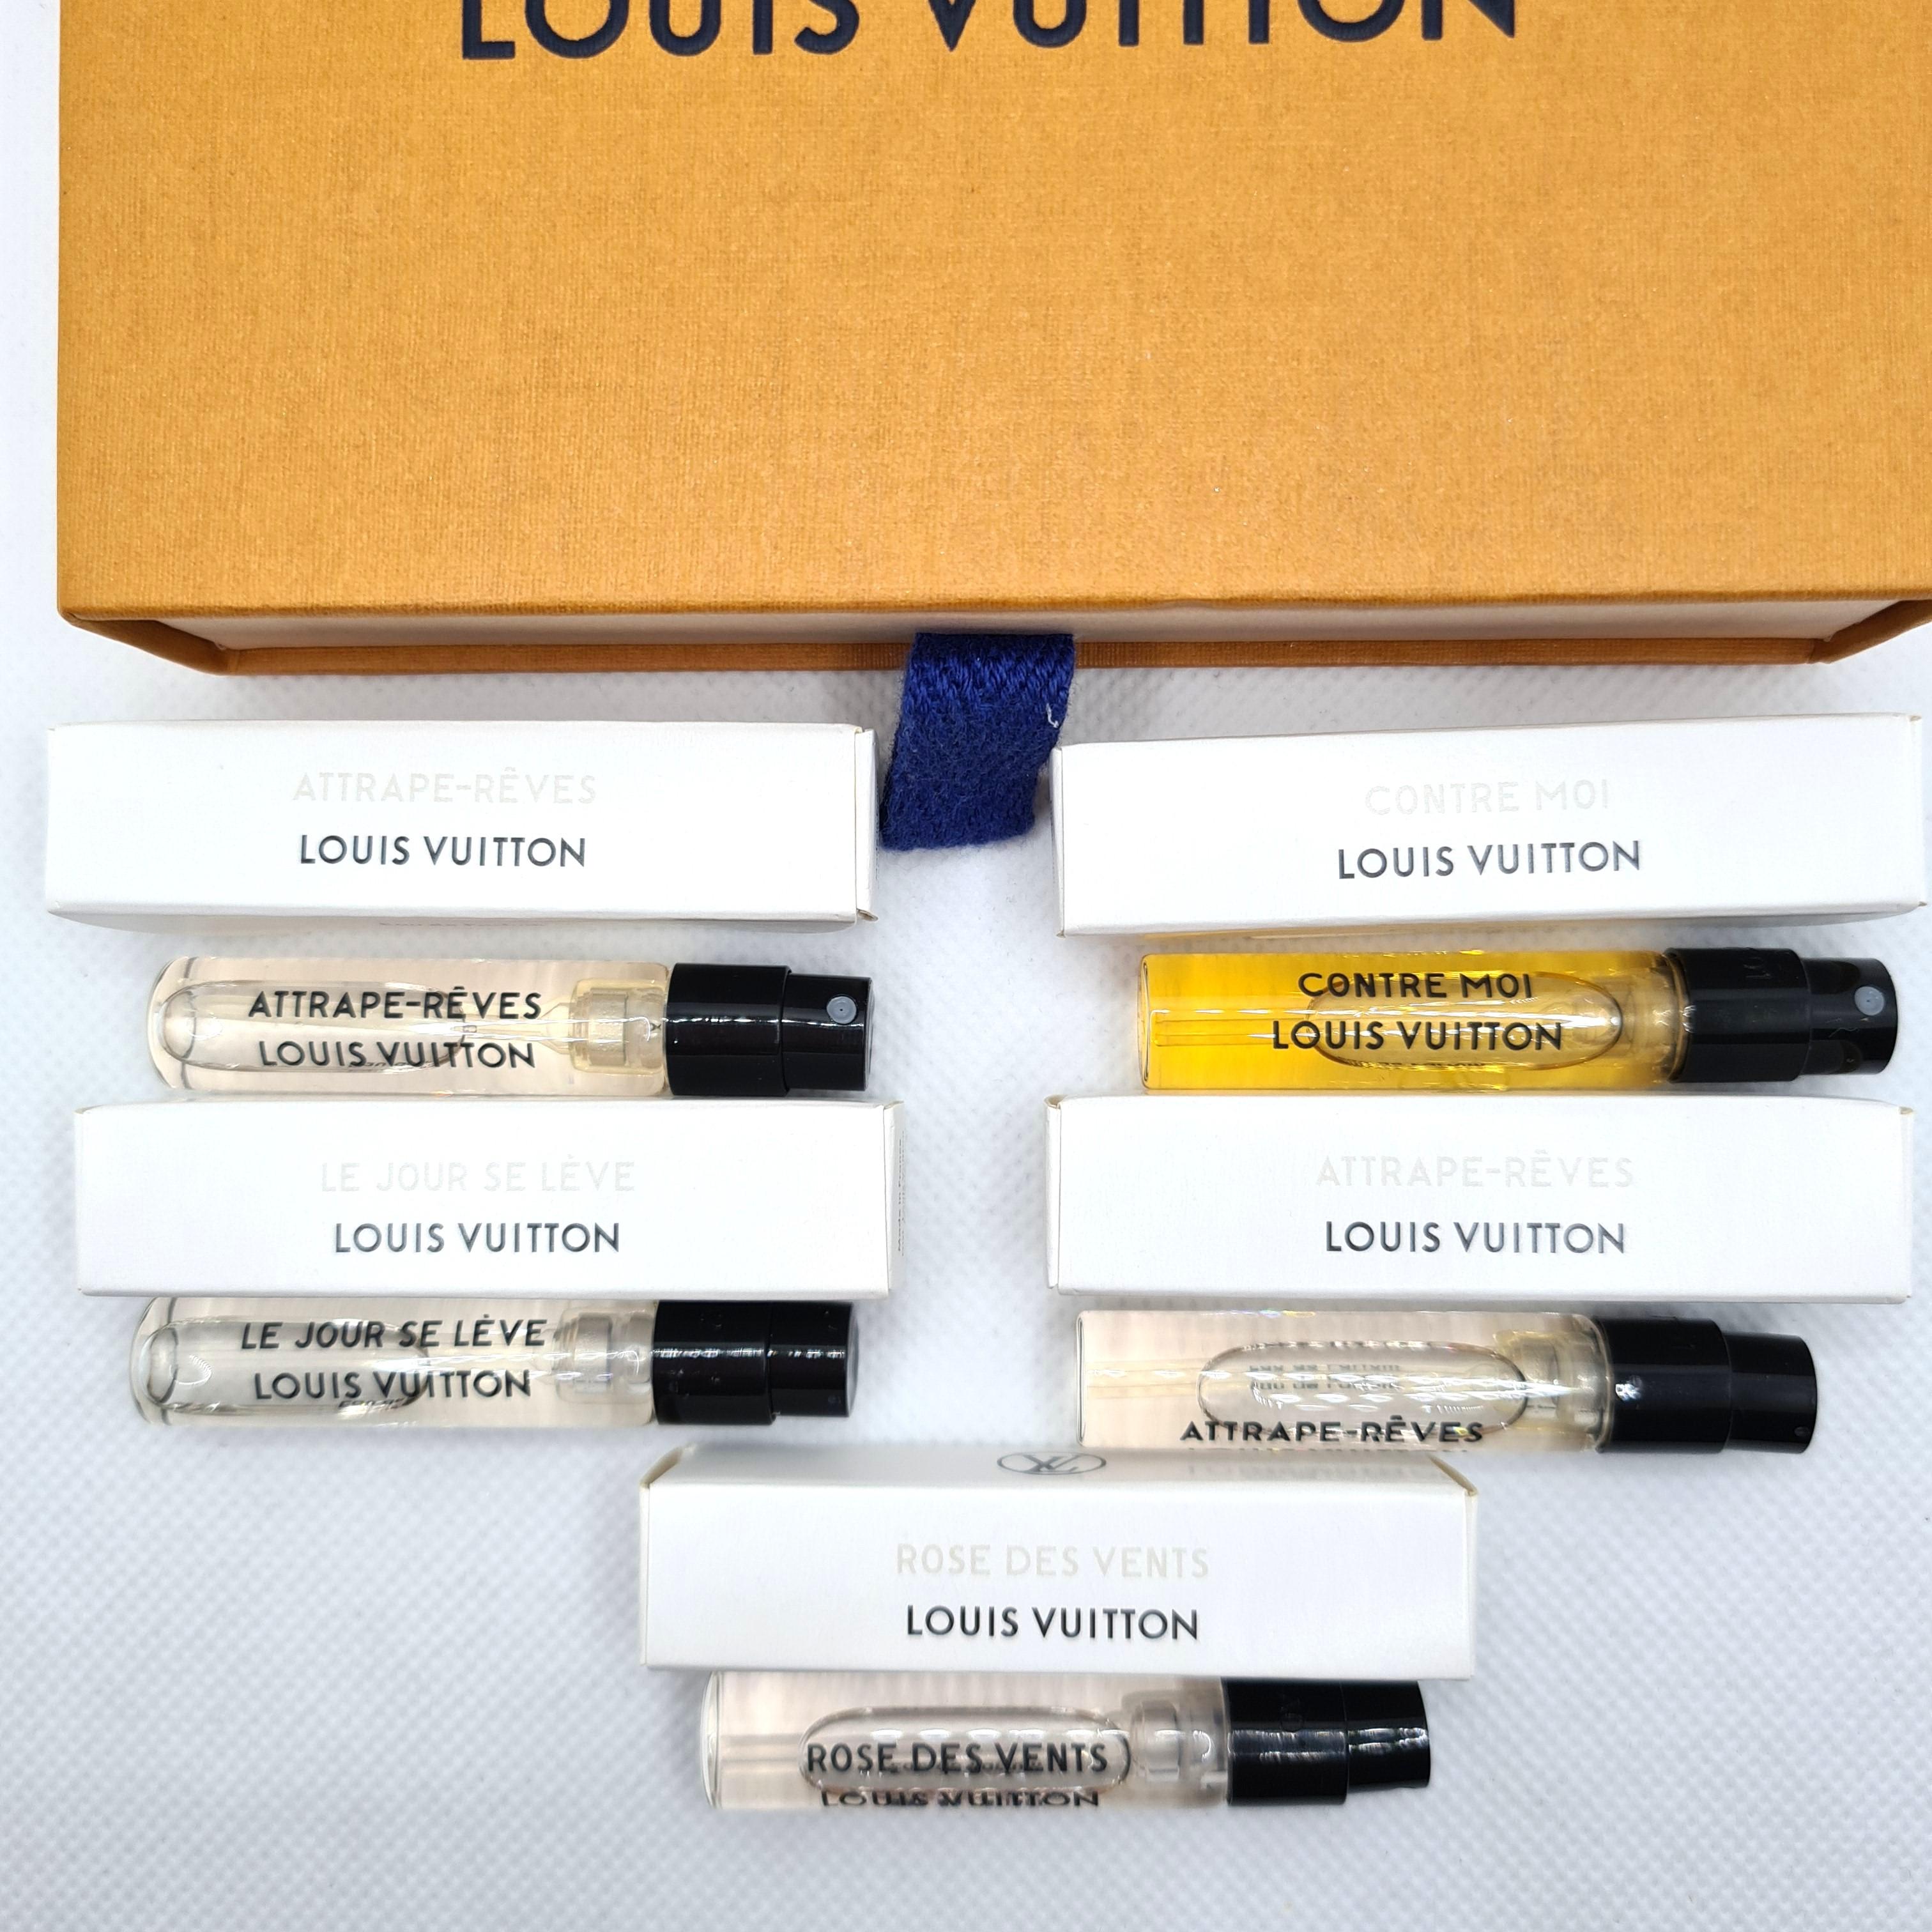 AUTHENTIC LV LOUIS VUITTON Perfume Samples - 2 ml, Beauty & Personal Care,  Fragrance & Deodorants on Carousell